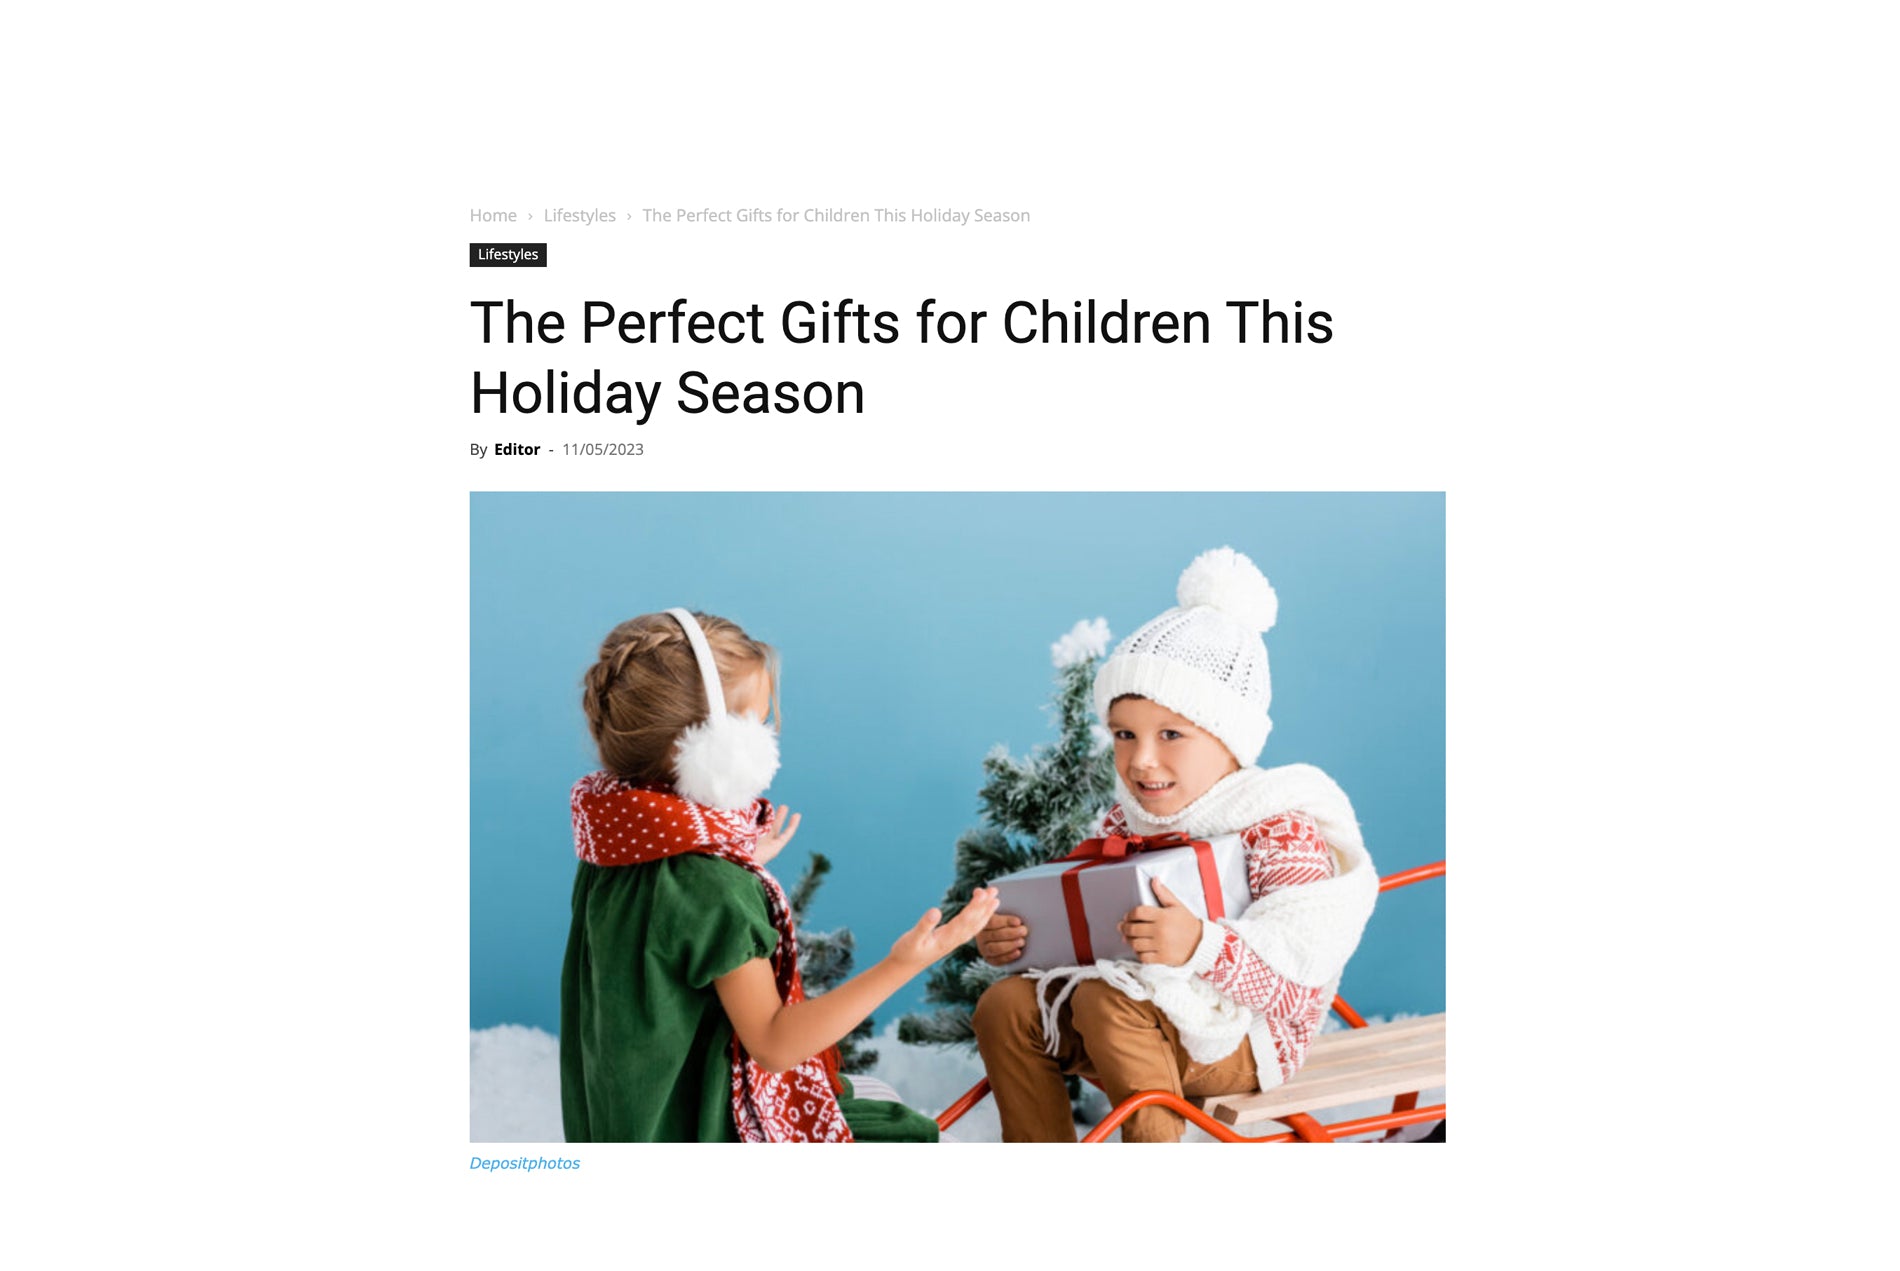 The Perfect Gifts for Children This Holiday Season